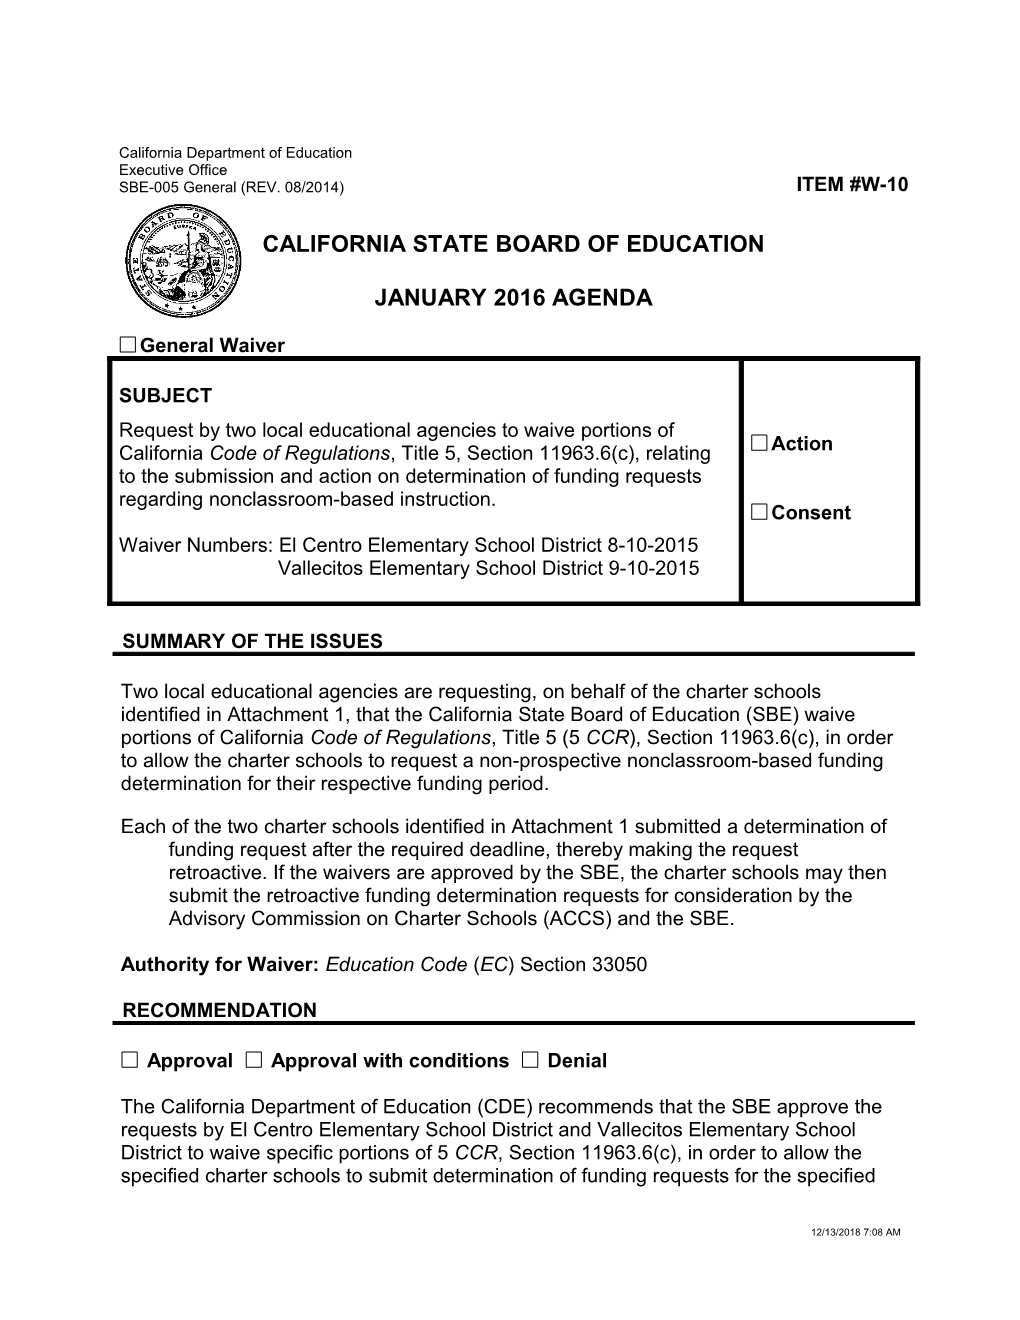 January 2016 Waiver Item W-10 - Meeting Agendas (CA State Board of Education)